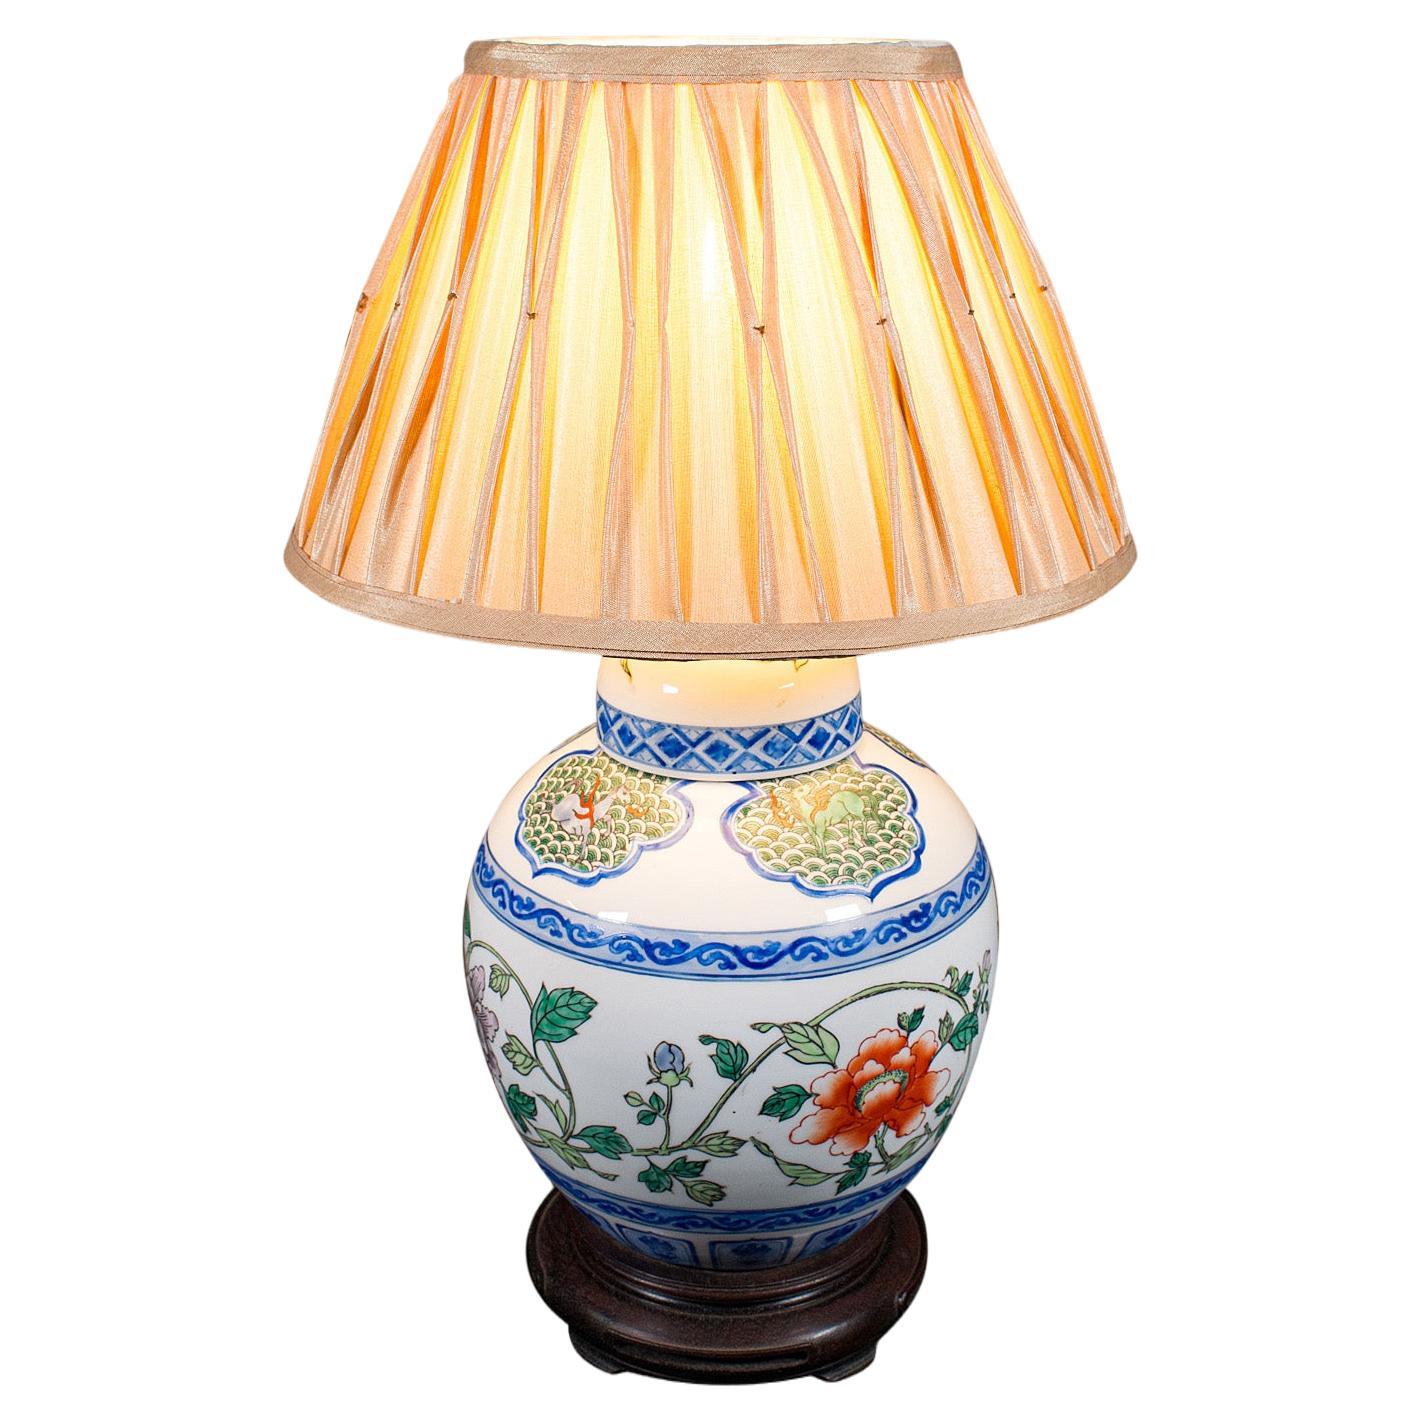 Vintage Art Deco Table Lamp, Chinese, Ceramic, Accent Light, Mid 20th Century For Sale